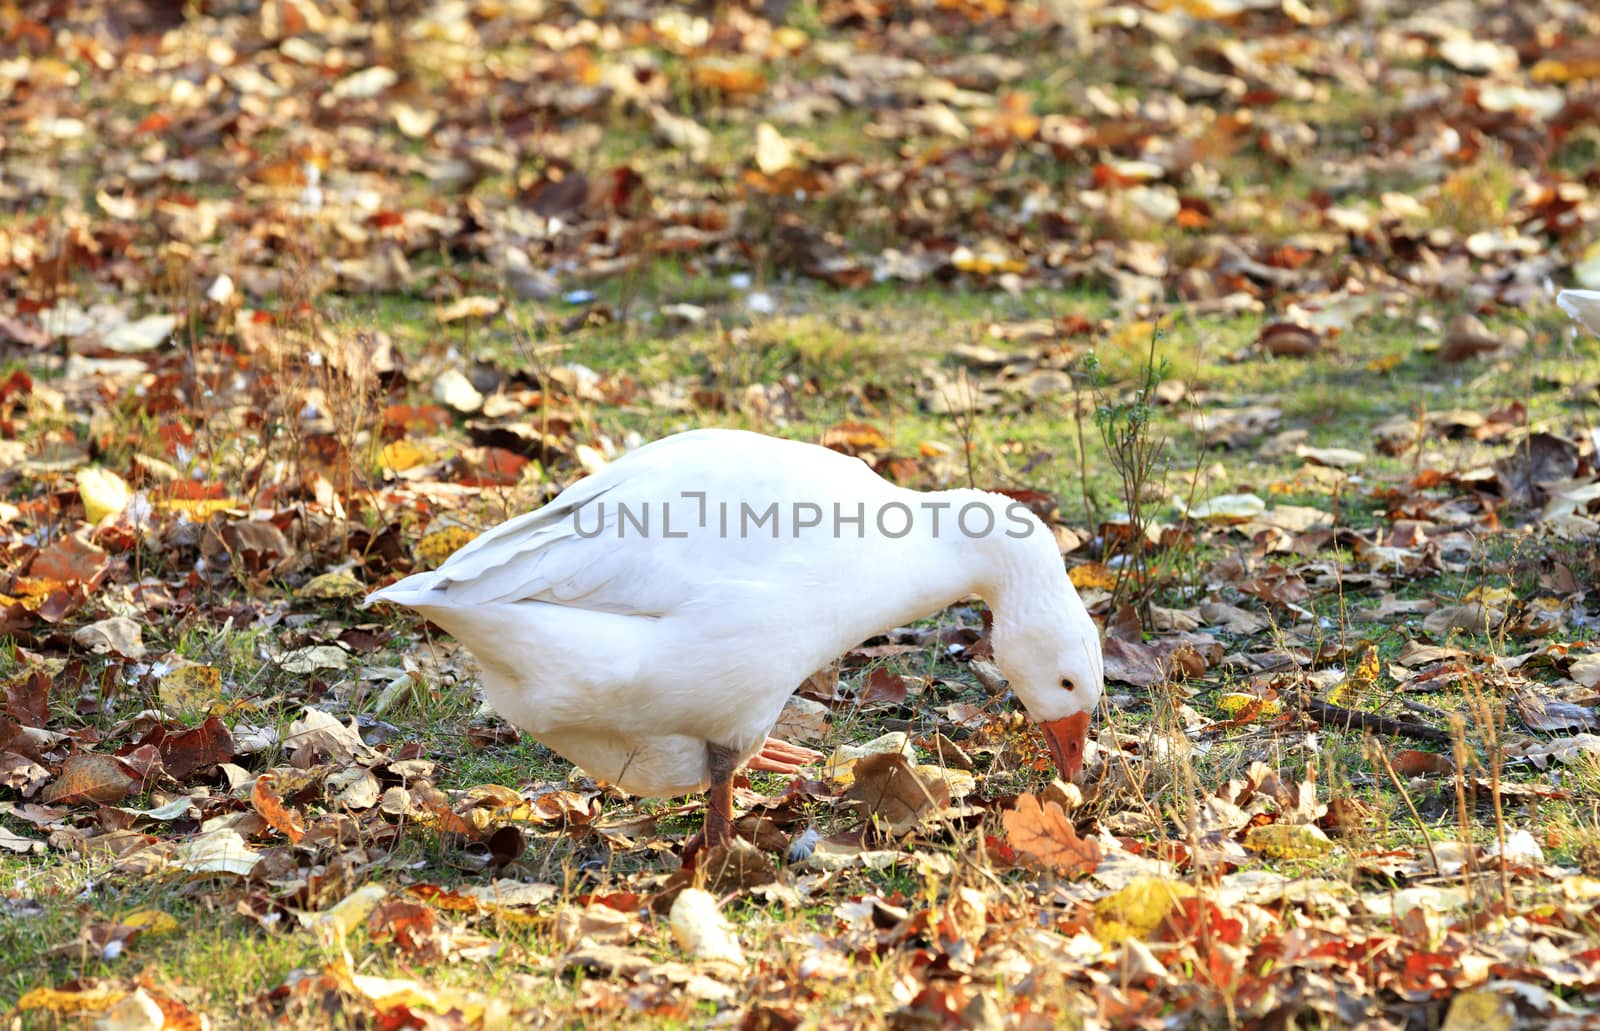 White goose grazes in a clearing among the fallen leaves in the autumn garden in the sunlight closeup.